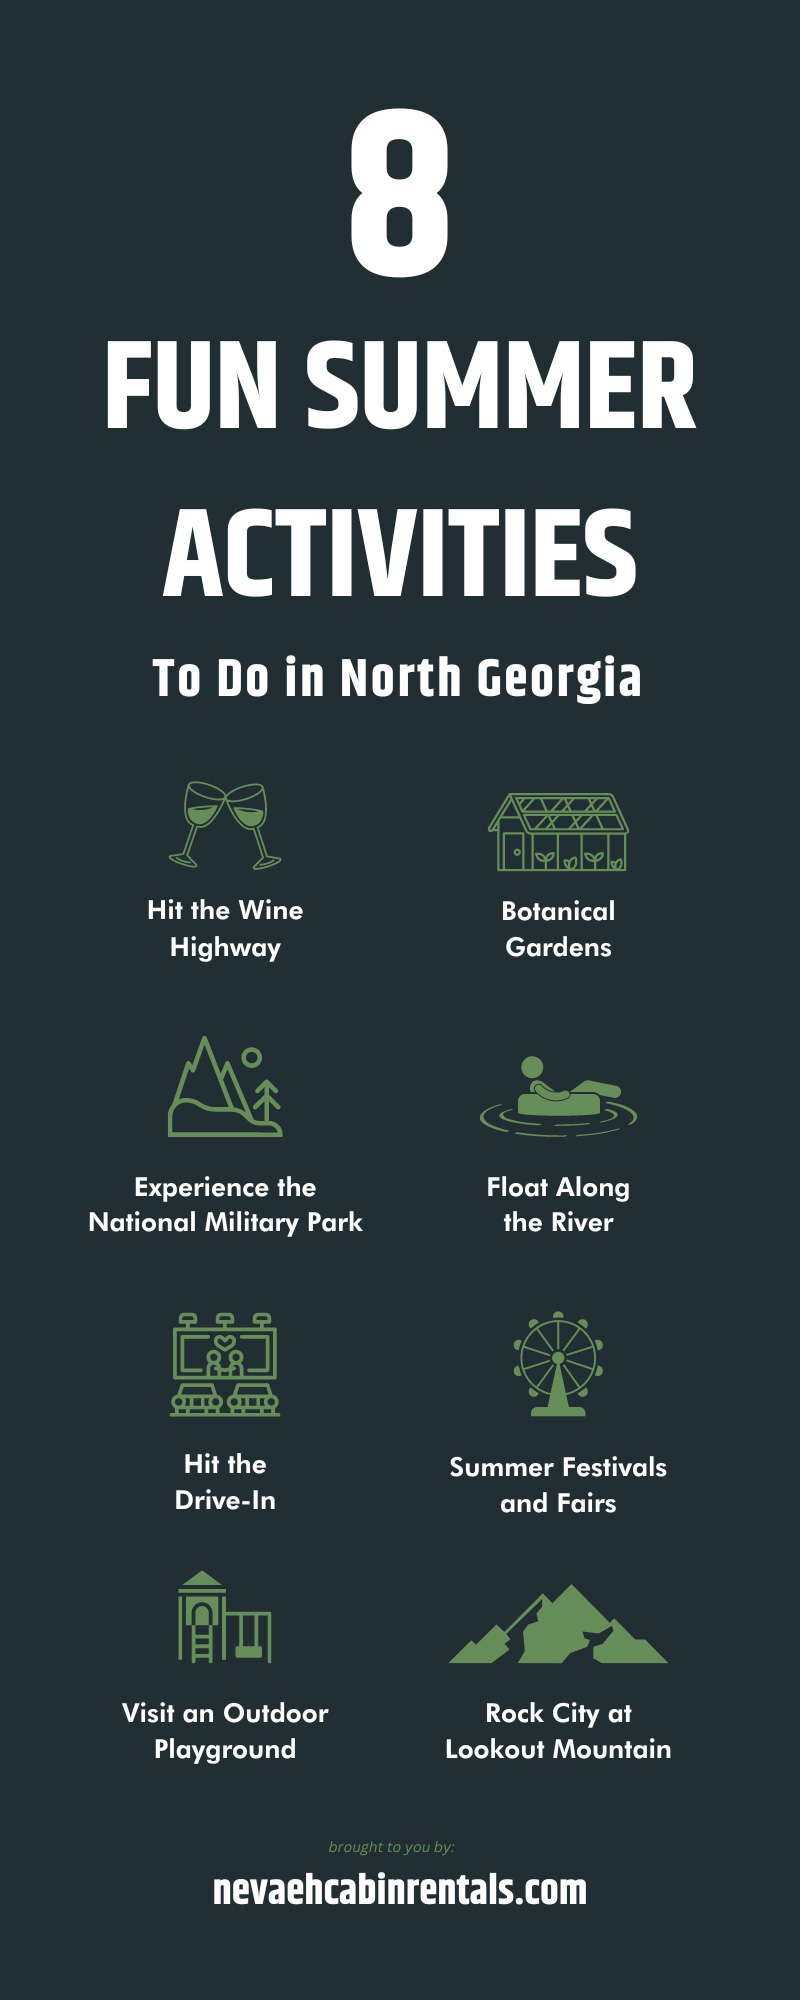 8 Fun Summer Activities To Do in North Georgia